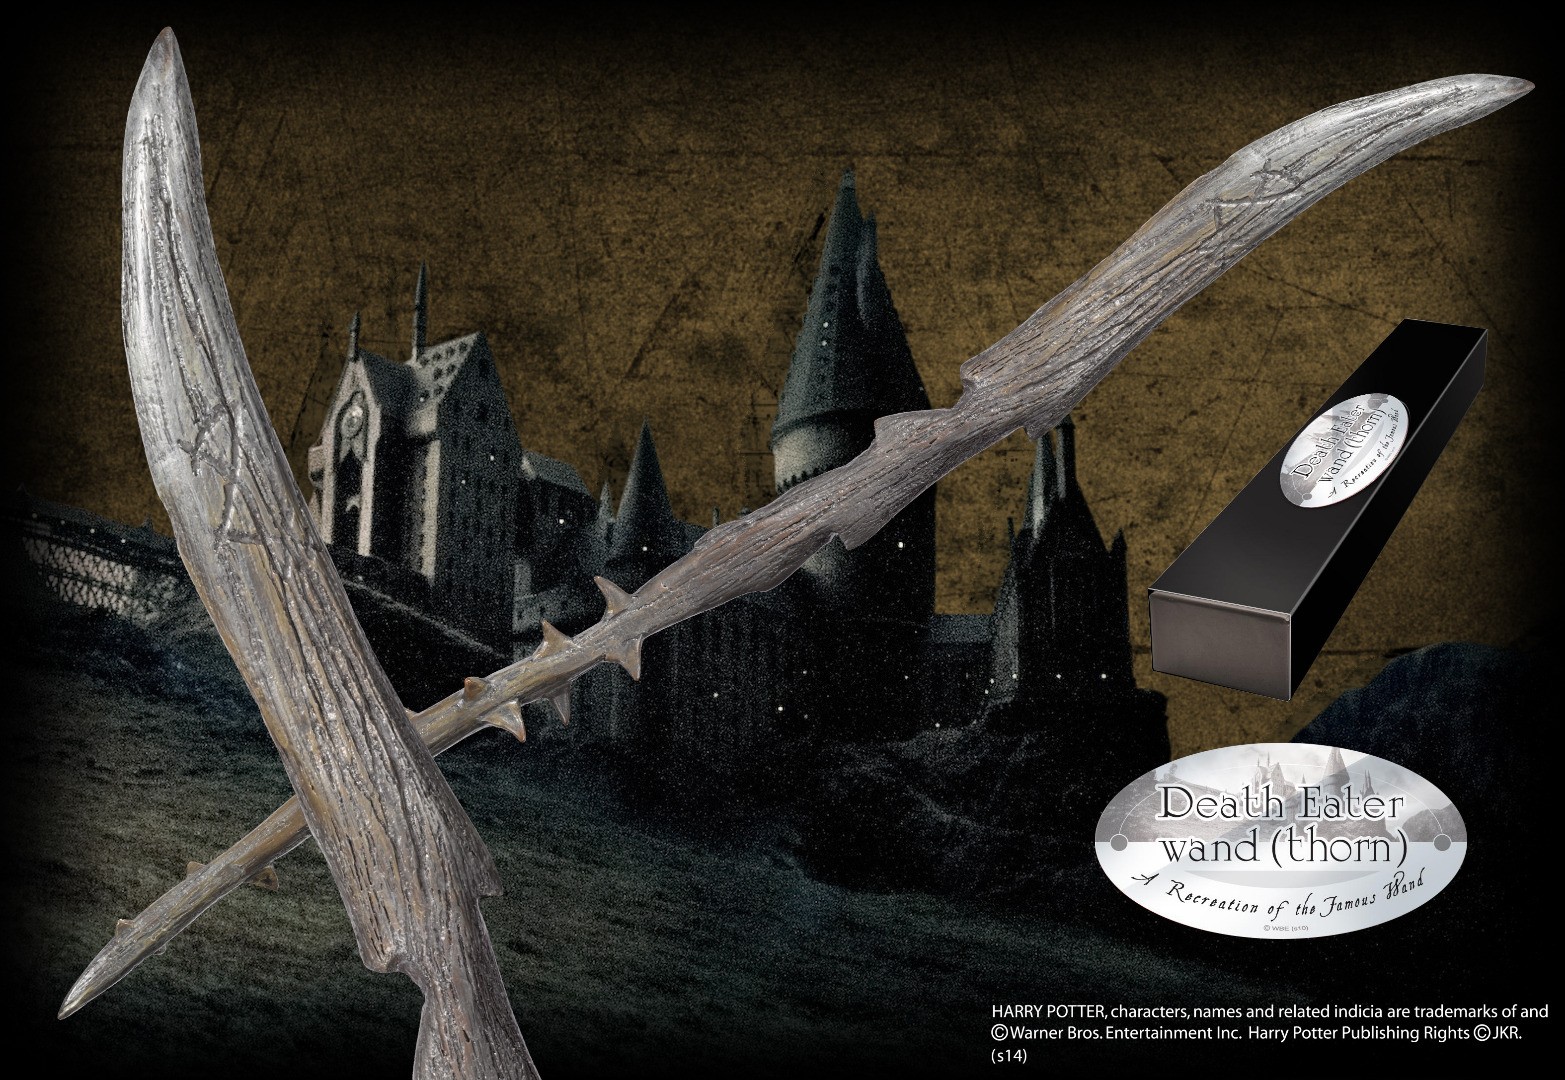 Death Eater Character Wand (Thorn)